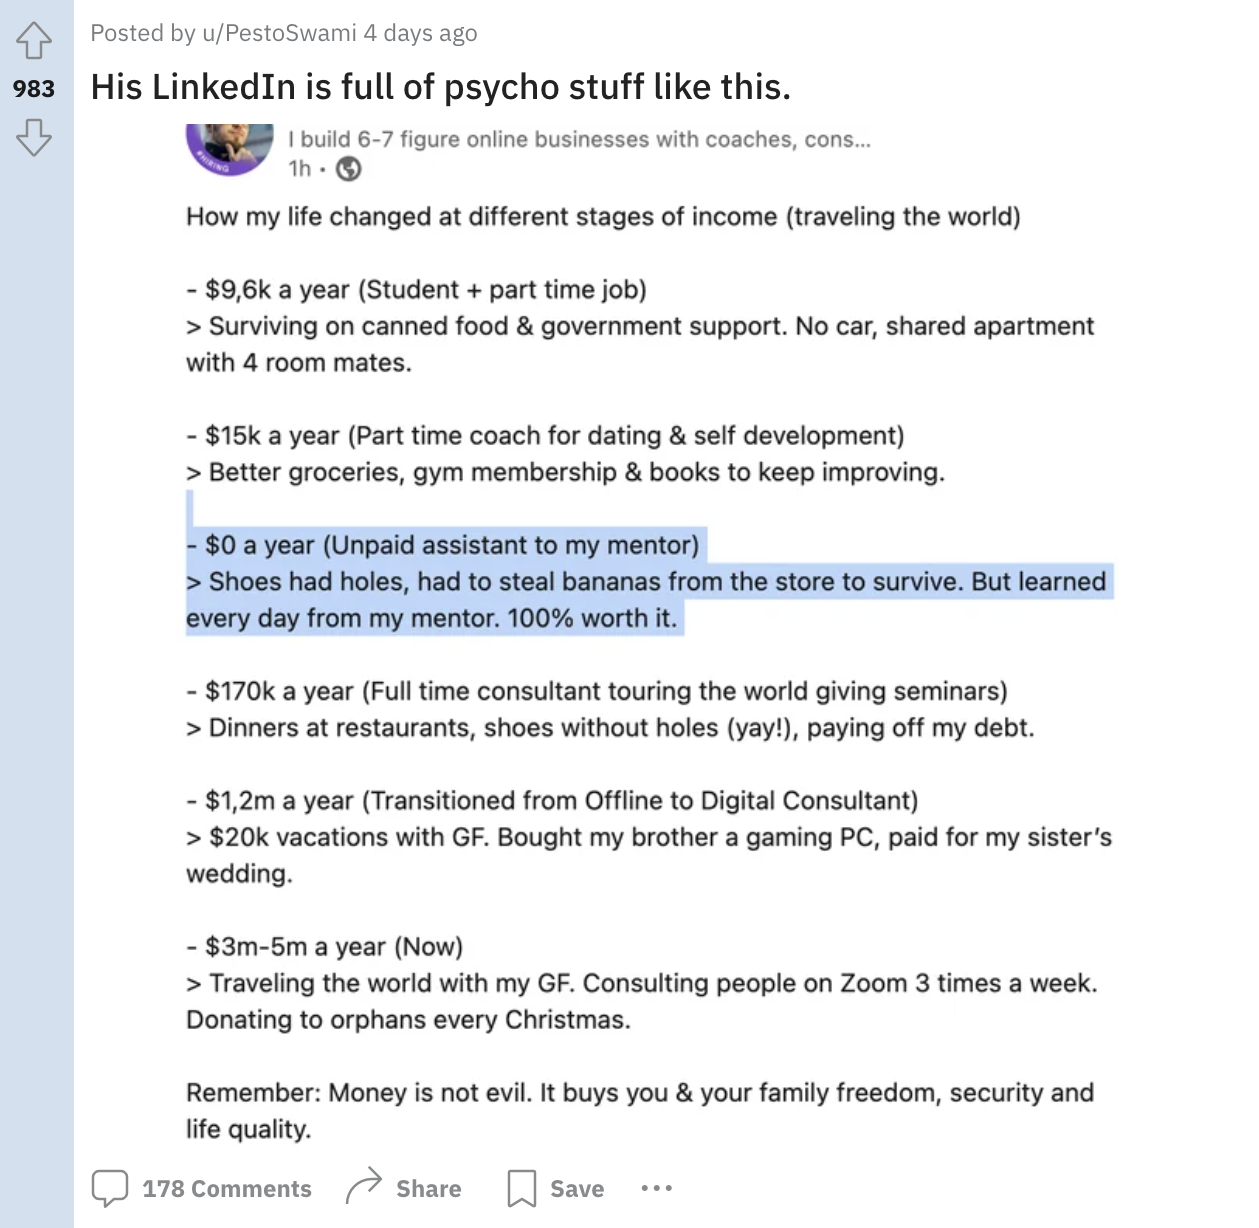 screenshot - Posted by uPestoSwami 4 days ago 983 His LinkedIn is full of psycho stuff this. I build 67 figure online businesses with coaches, cons... 1h How my life changed at different stages of income traveling the world $ a year Student part time job 